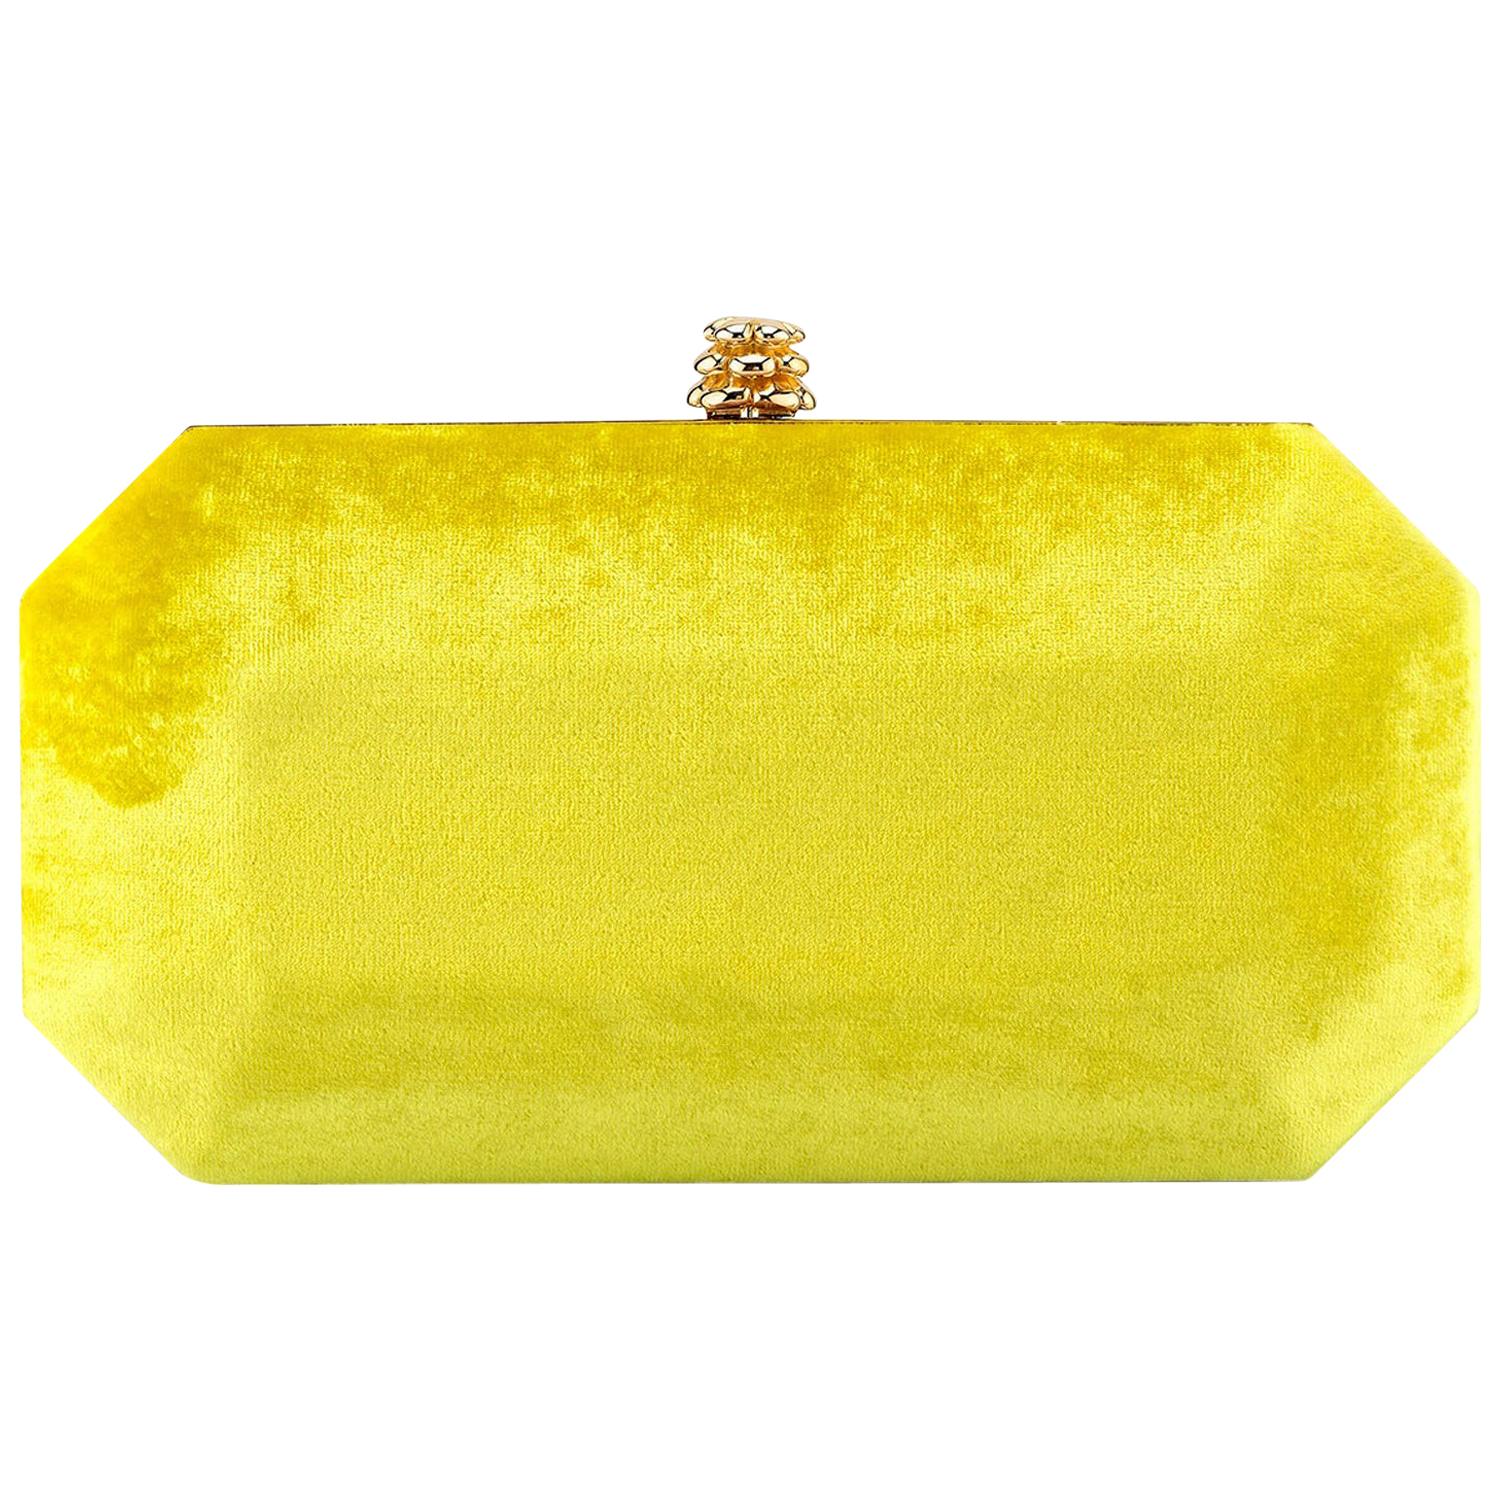 TYLER ELLIS Perry Small Clutch Yellow Crushed Velvet Gold Hardware